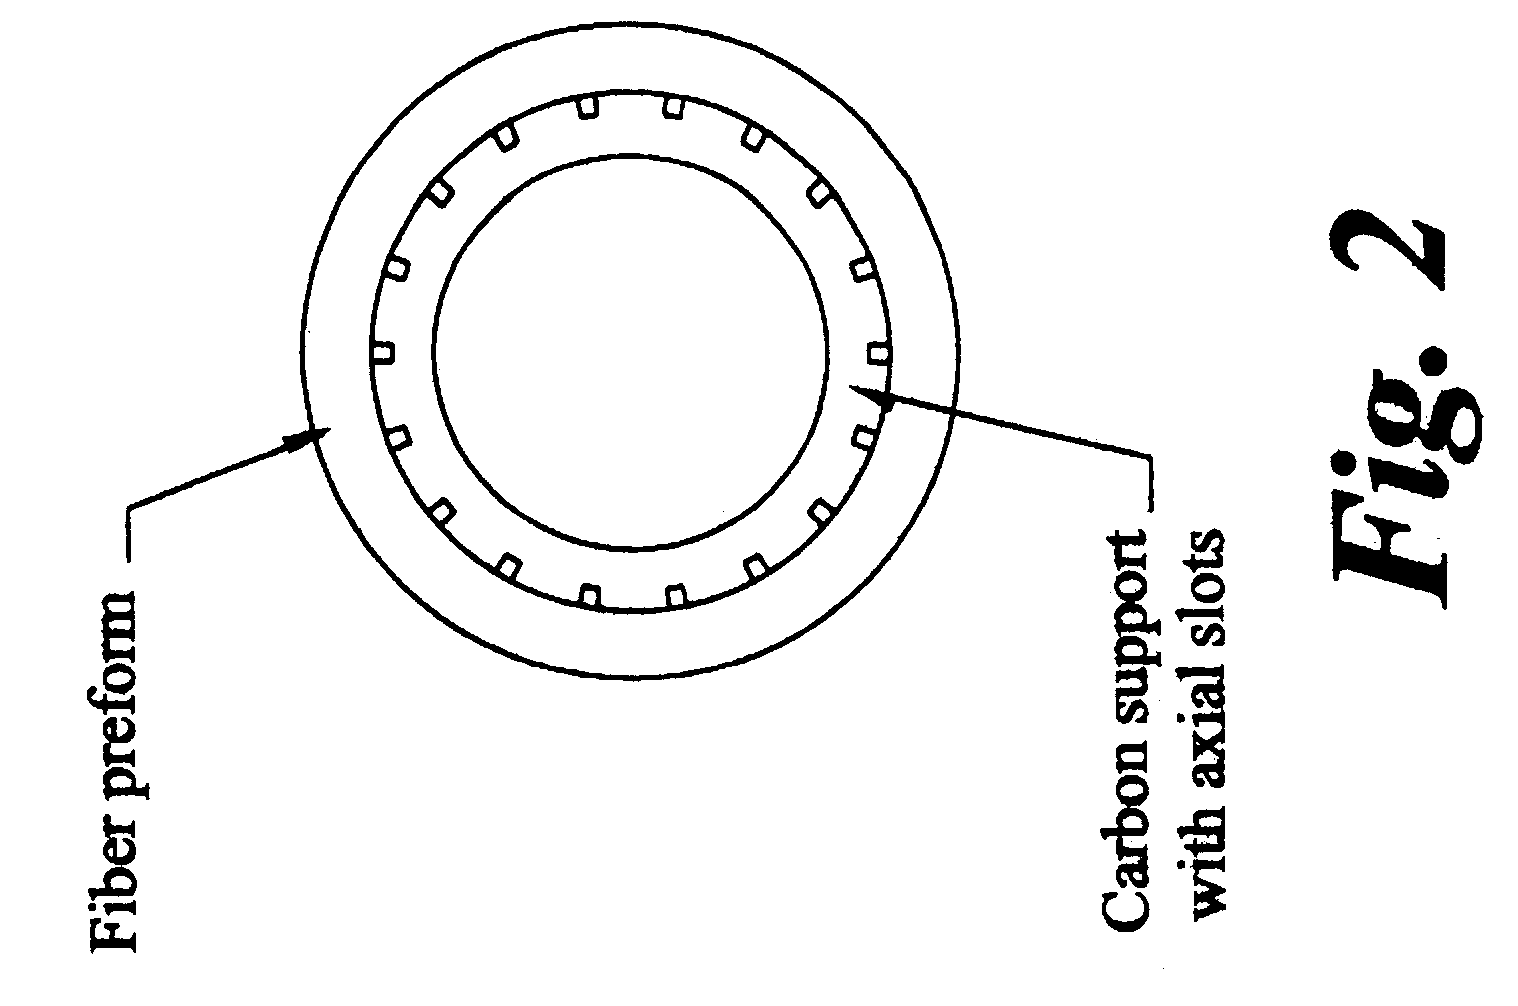 Method for producing melt-infiltrated ceramic composites using formed supports